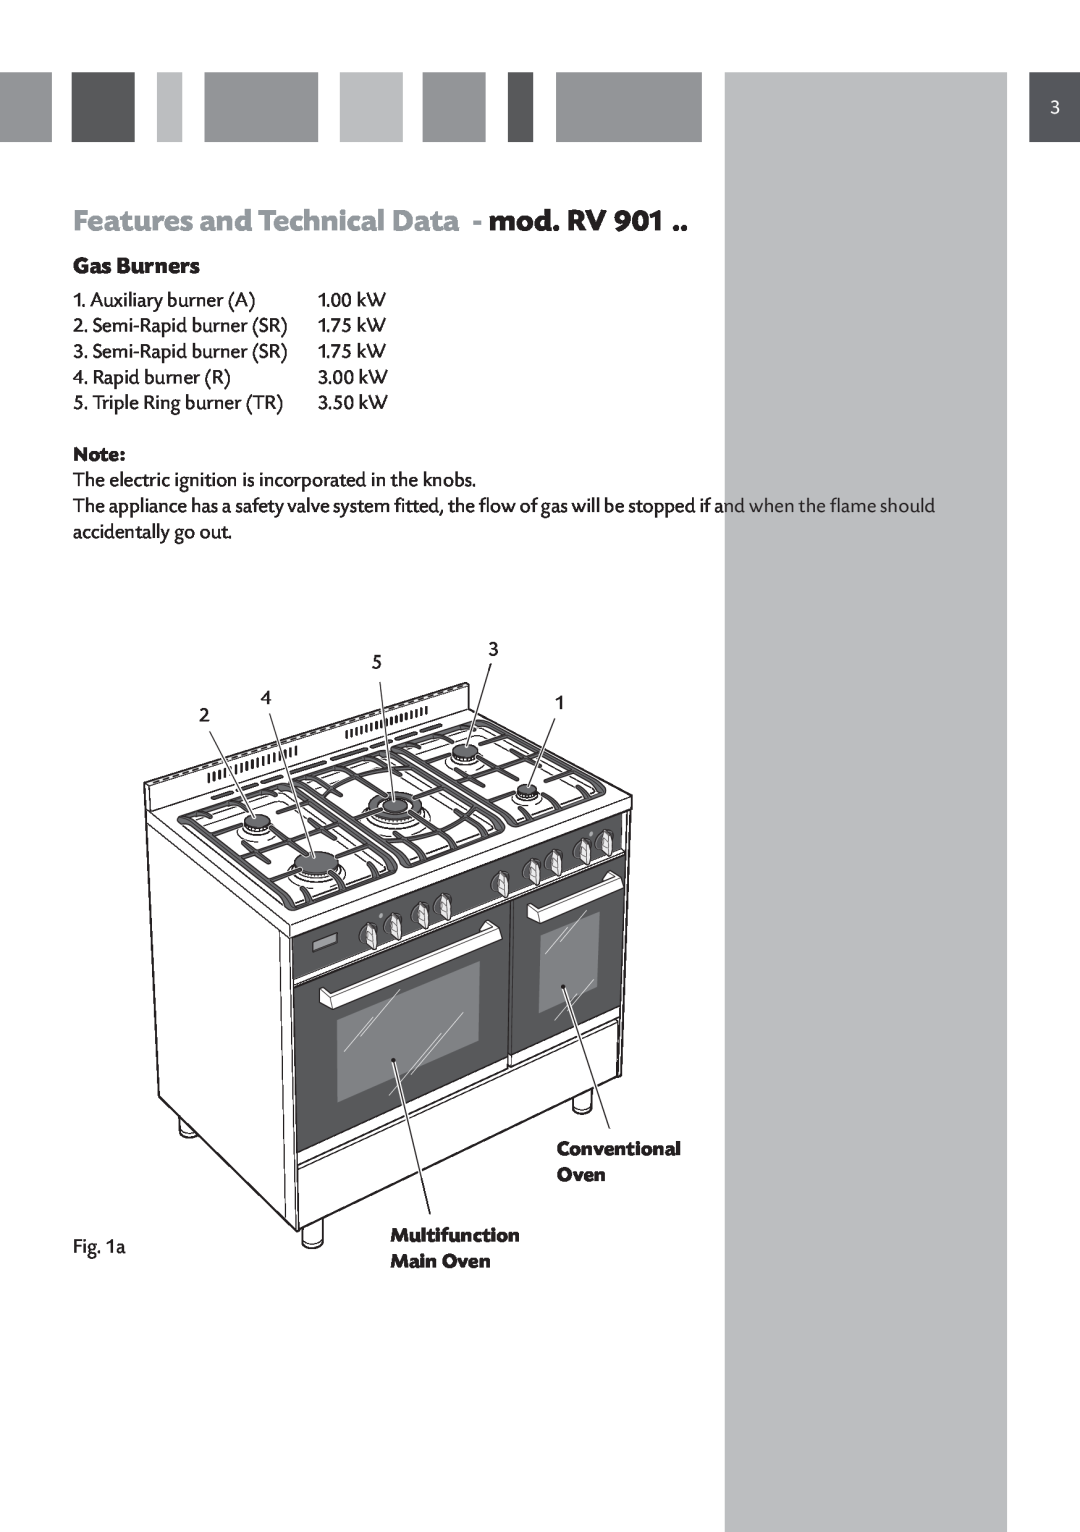 CDA RV 1001, RV 901 manual Features and Technical Data - mod. RV, Gas Burners, Conventional Oven, Main Oven 